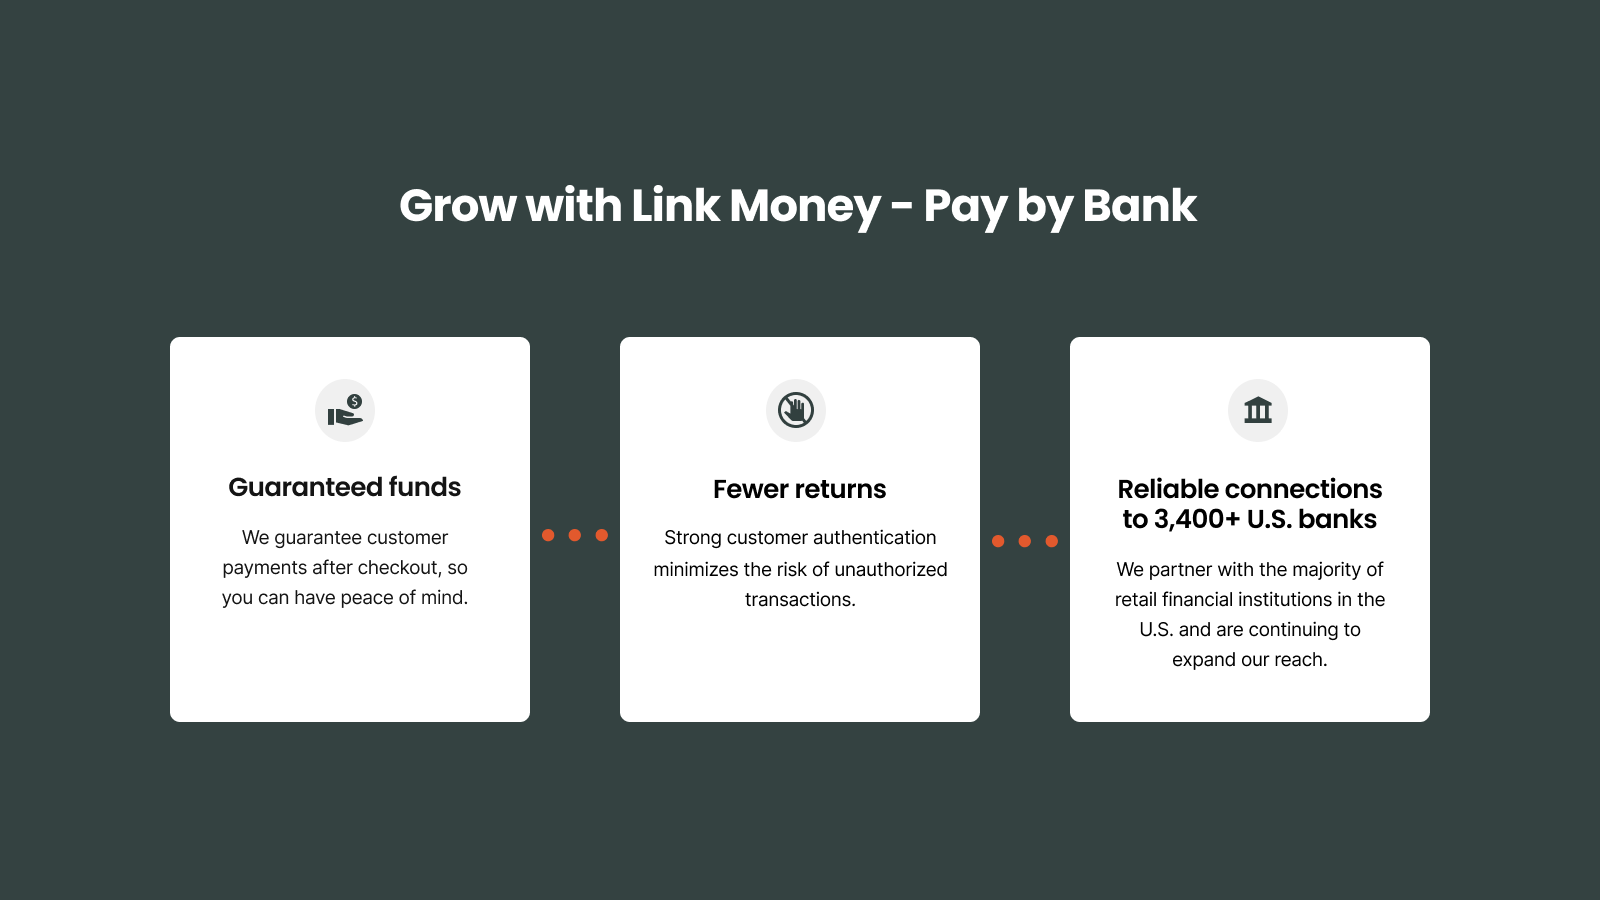 Grow with Link Money - Pay by Bank